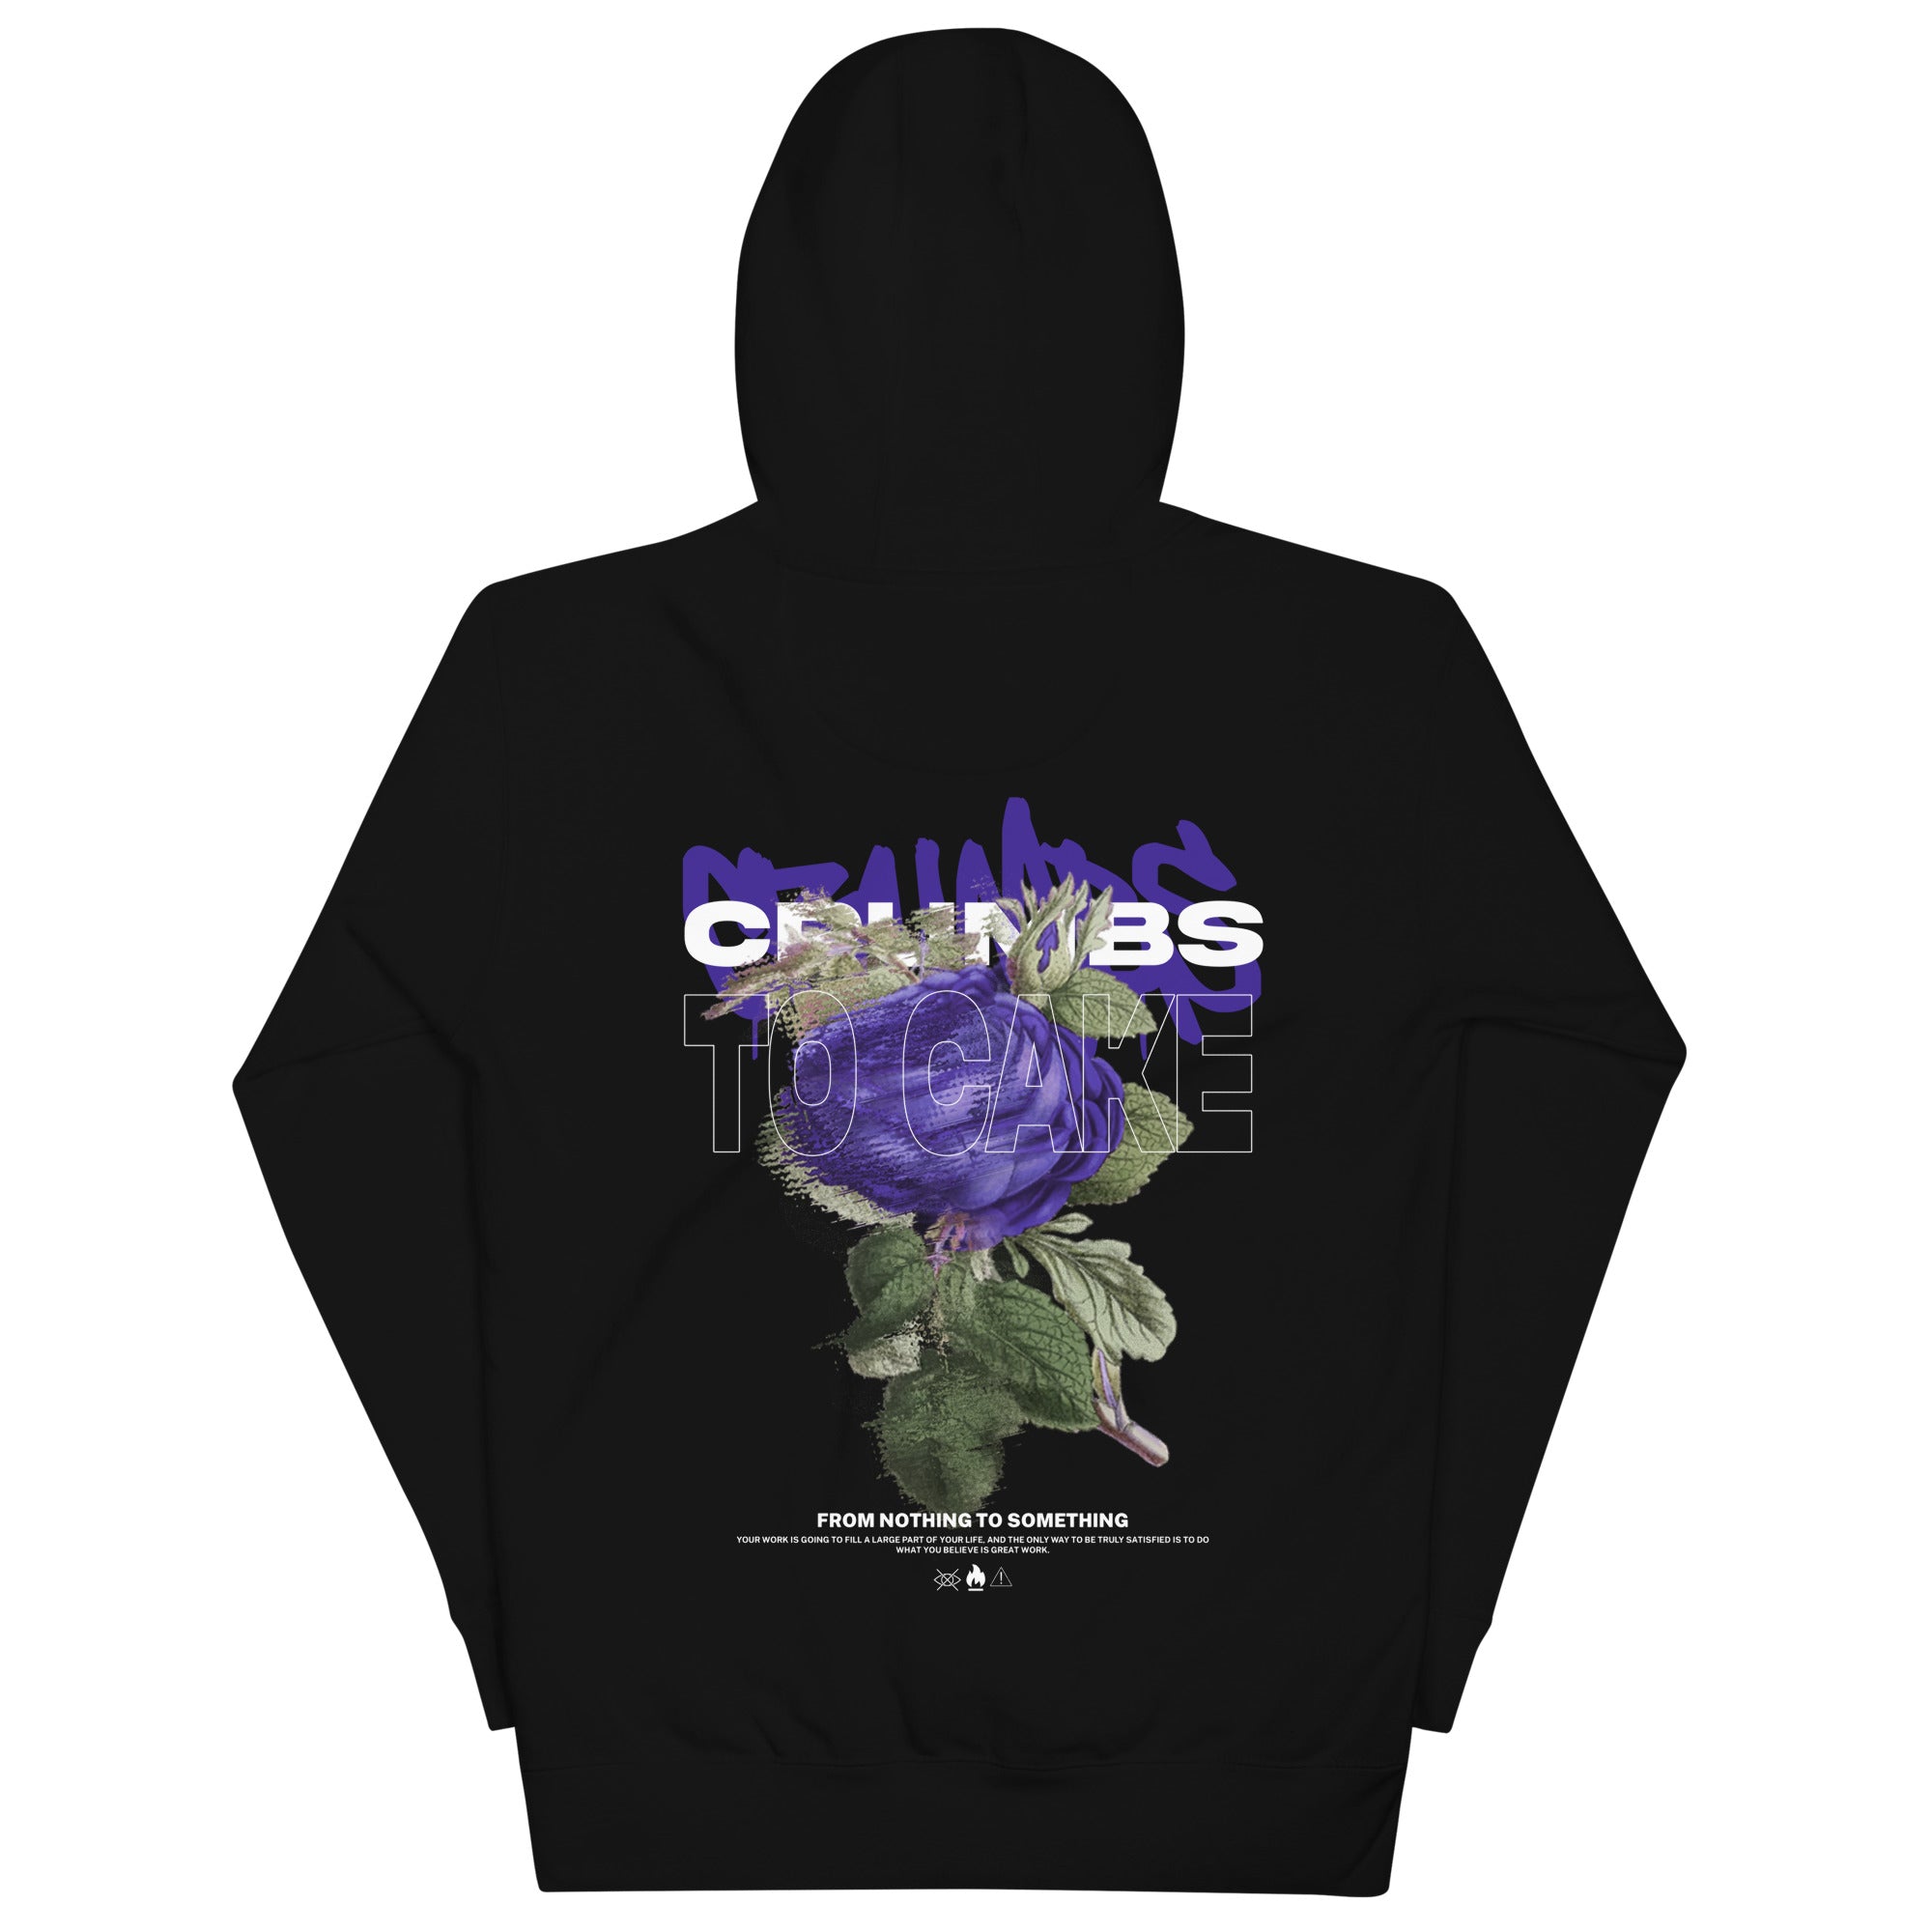 Royal Imperfection Men's Graphic Hoodie